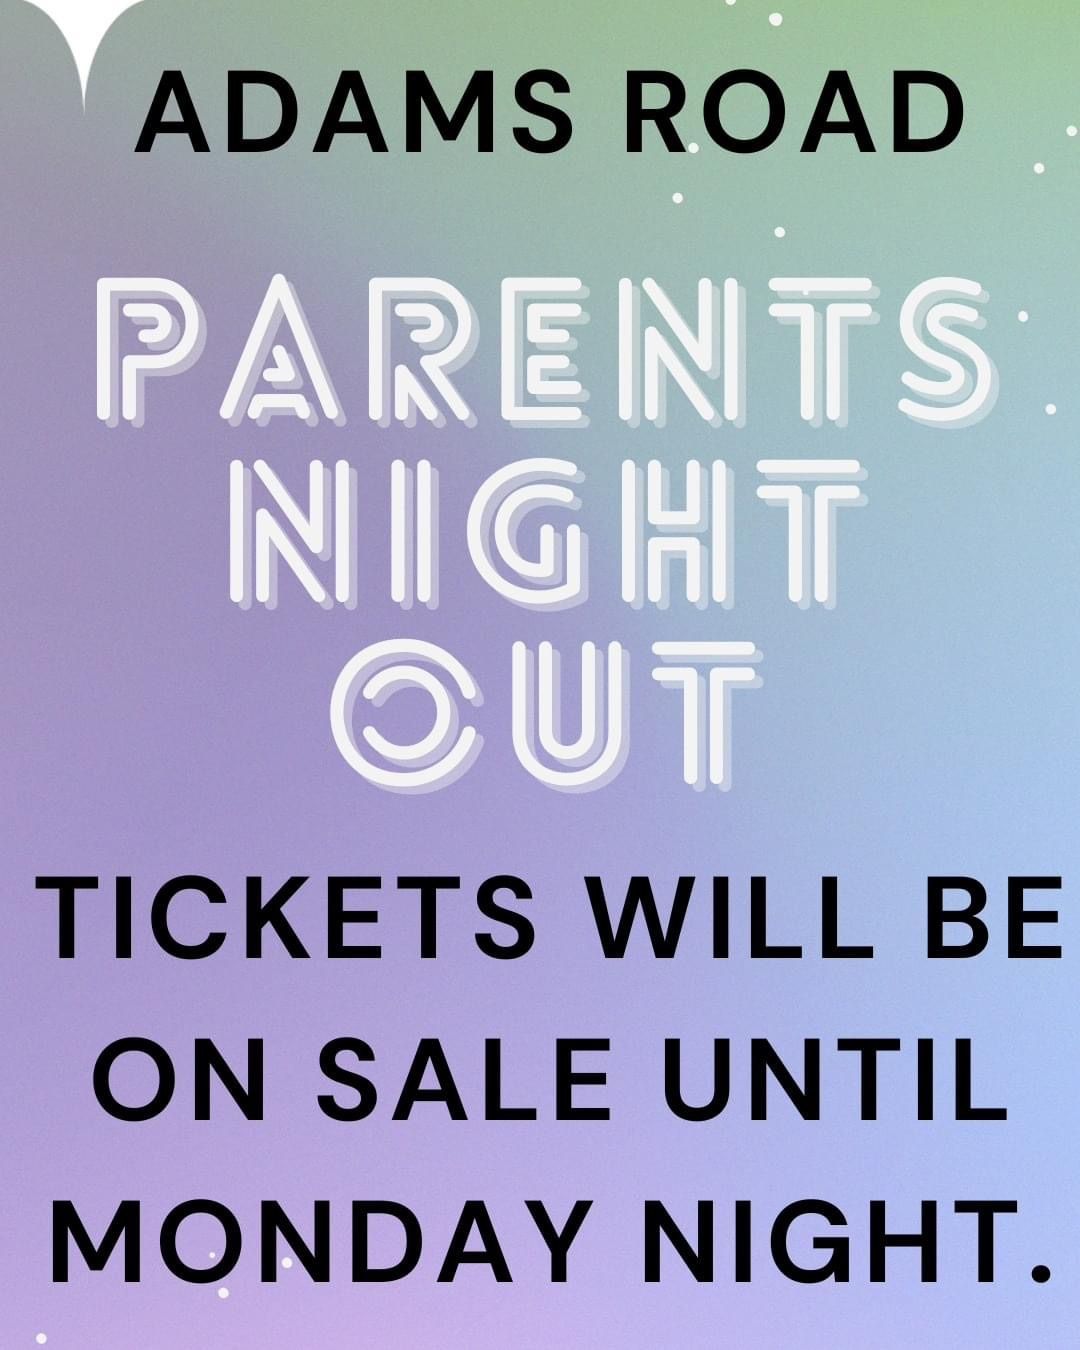 Adams Road Parents Night Out Fundraiser 